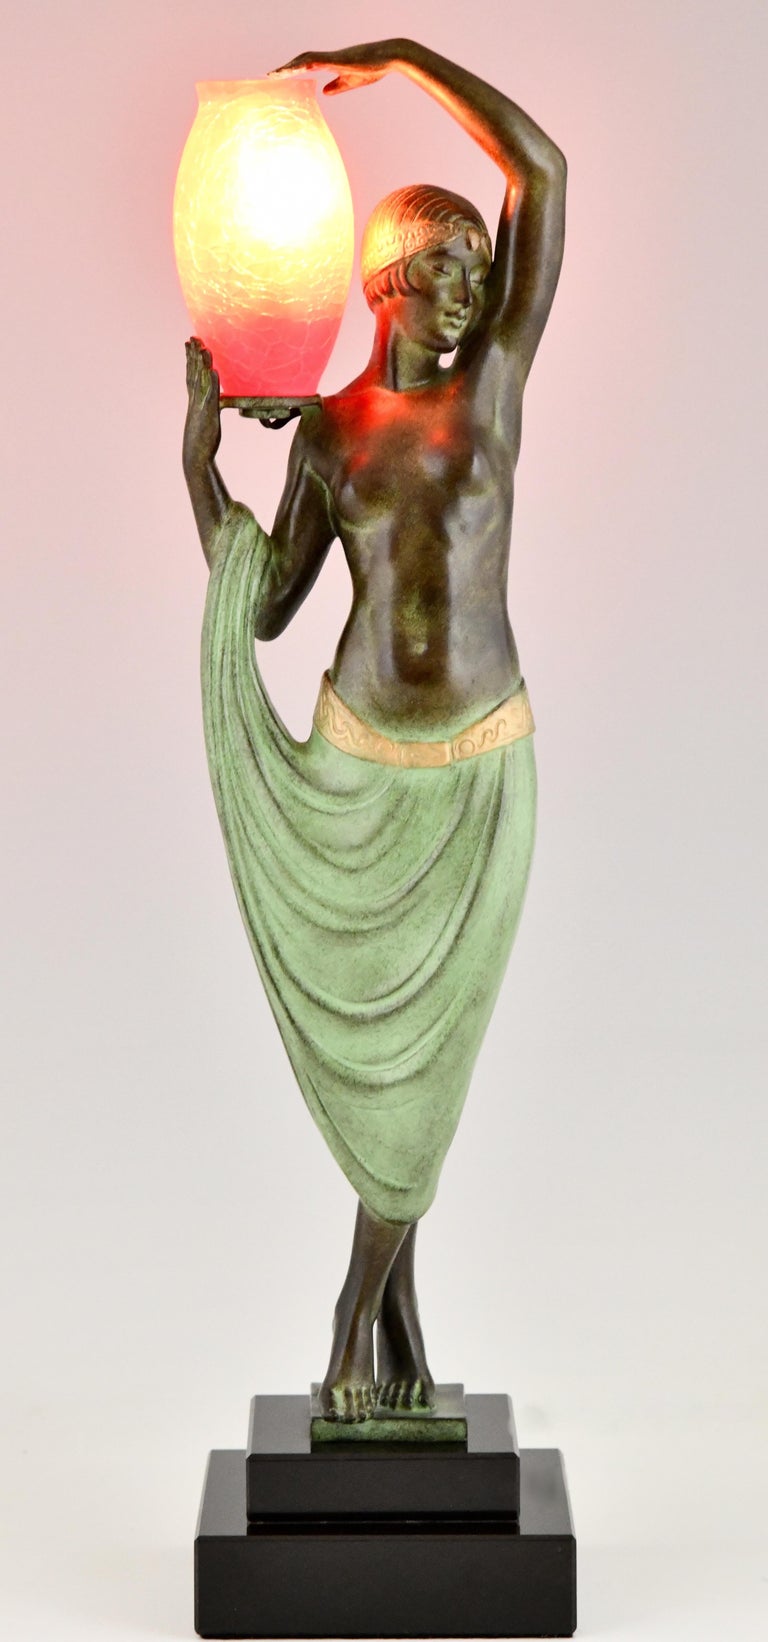 Odalisque?, Art Deco style lamp sculpture nude with vase. 
Signed Fayral, pseudonym of Pierre Le Faguays.?
This lamp was cast at the Max Le Verrier foundry. 
Patinated metal, marble and glass. 

Literature:
“Bronzes, sculptors and founders” by